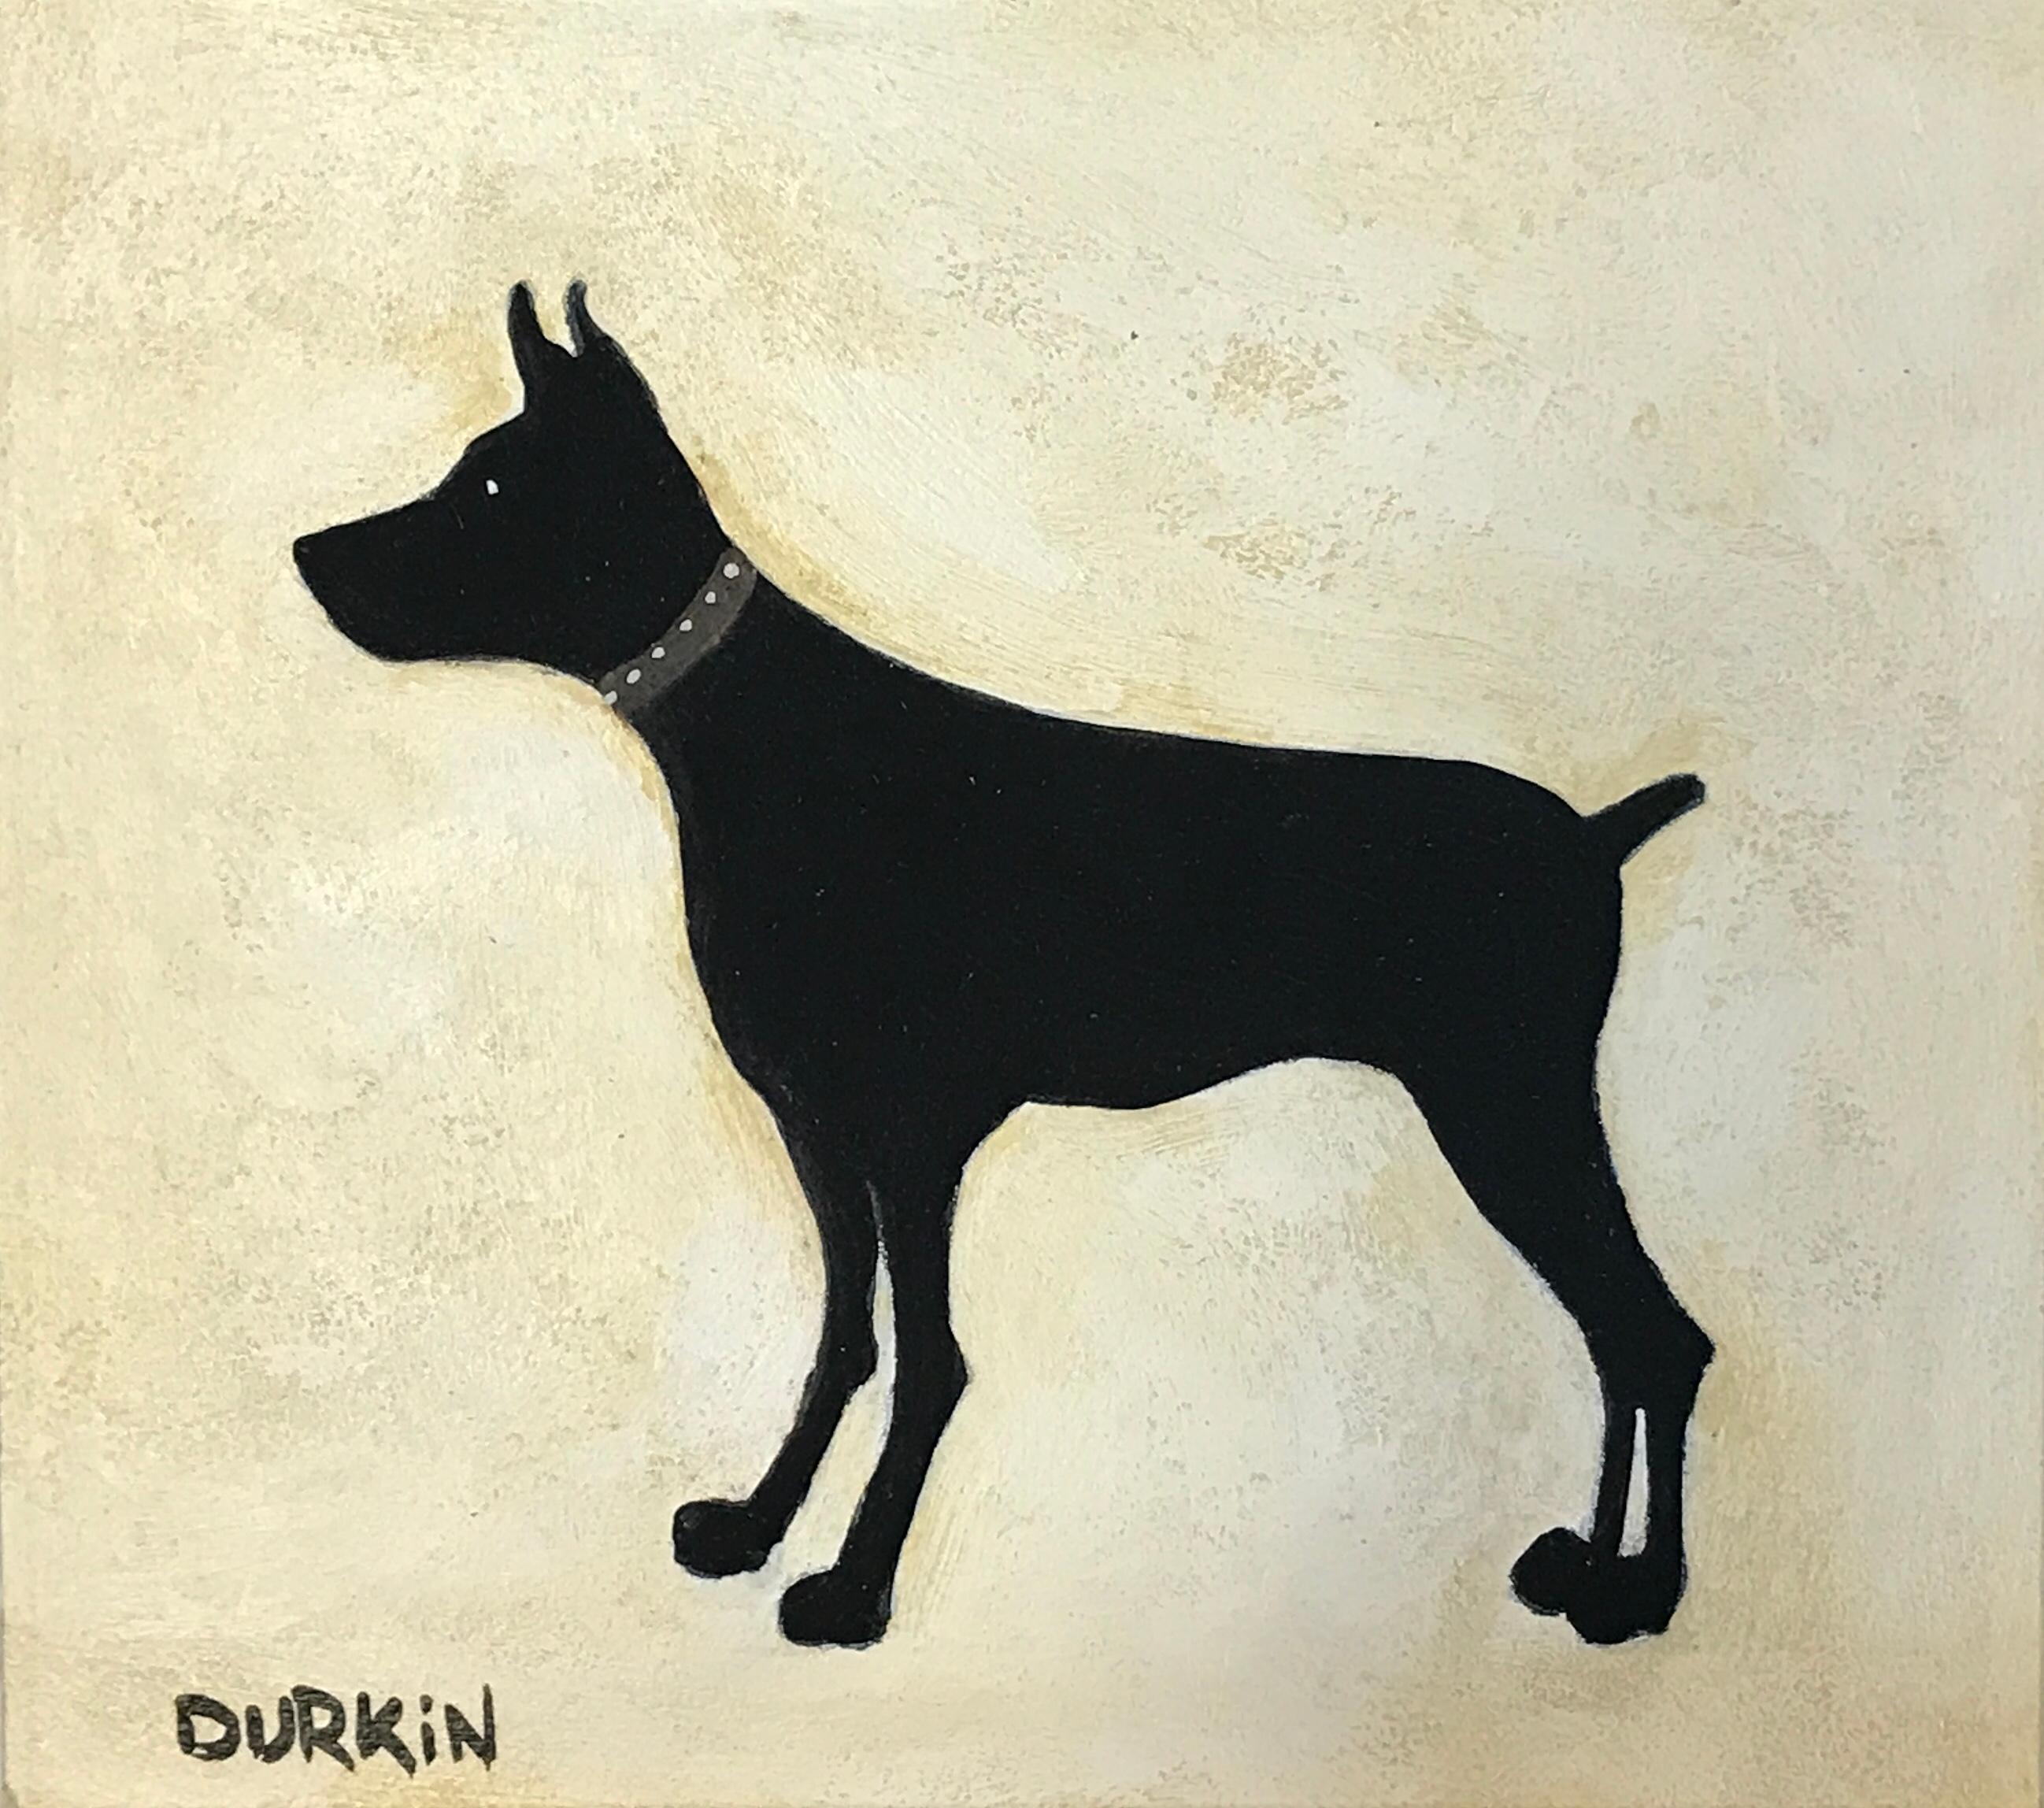 
Original painting of Black Dog I. Sean uses very toned down colours but draws the attention to a black dog on a lighter background.

ADDITIONAL INFORMATION:
Acrylic paint on Canvas
30 H x 32 W x 5 D cm (11.81 x 12.60 x 1.97 in)
Sold framed

Image